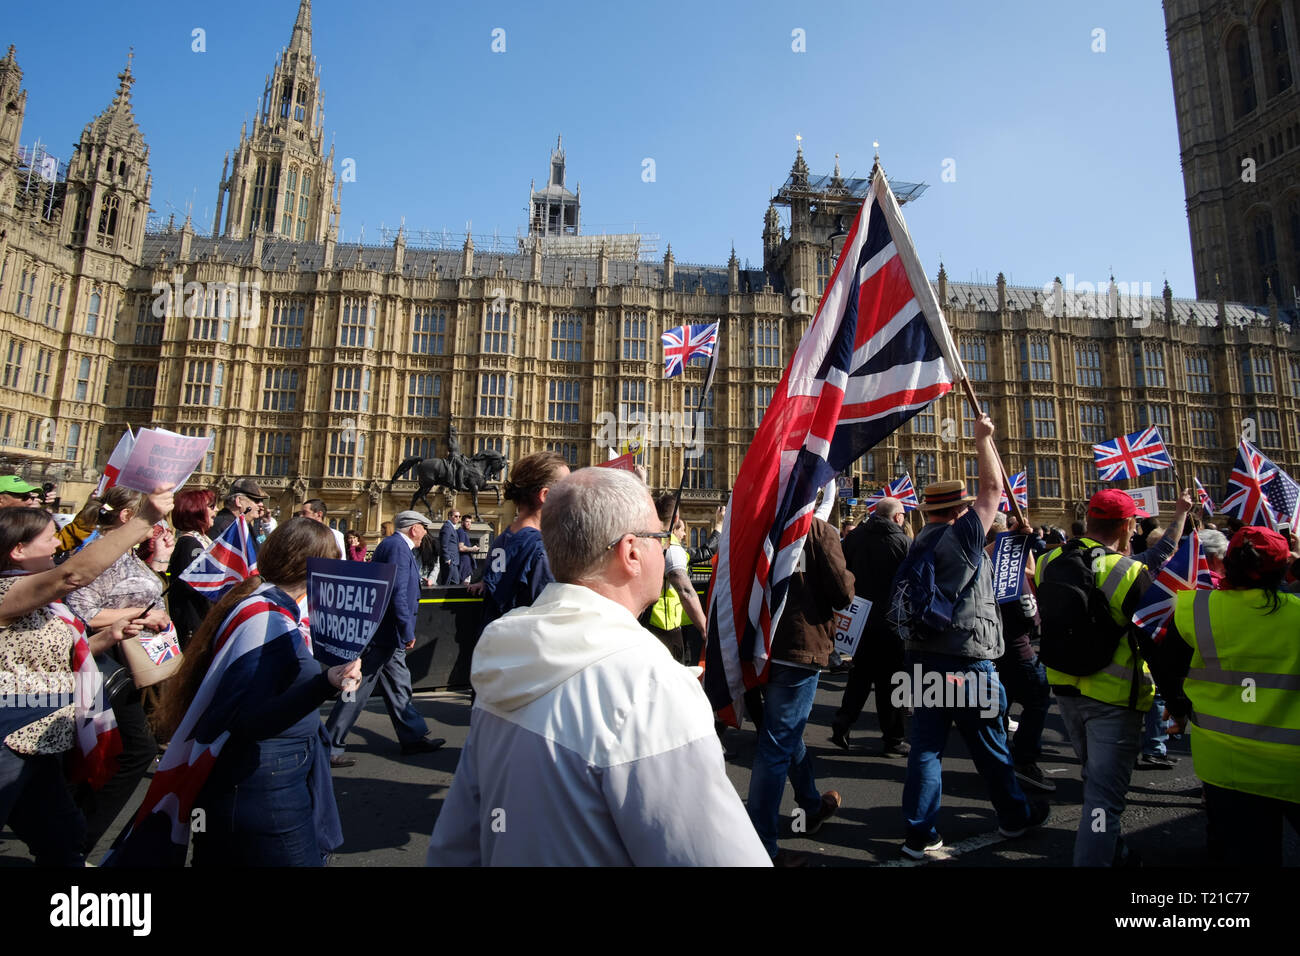 London, UK. 29th March 2019. Brexit protests outside parliament in London, UK. Credit: Jason Wood/Alamy Live News. Stock Photo